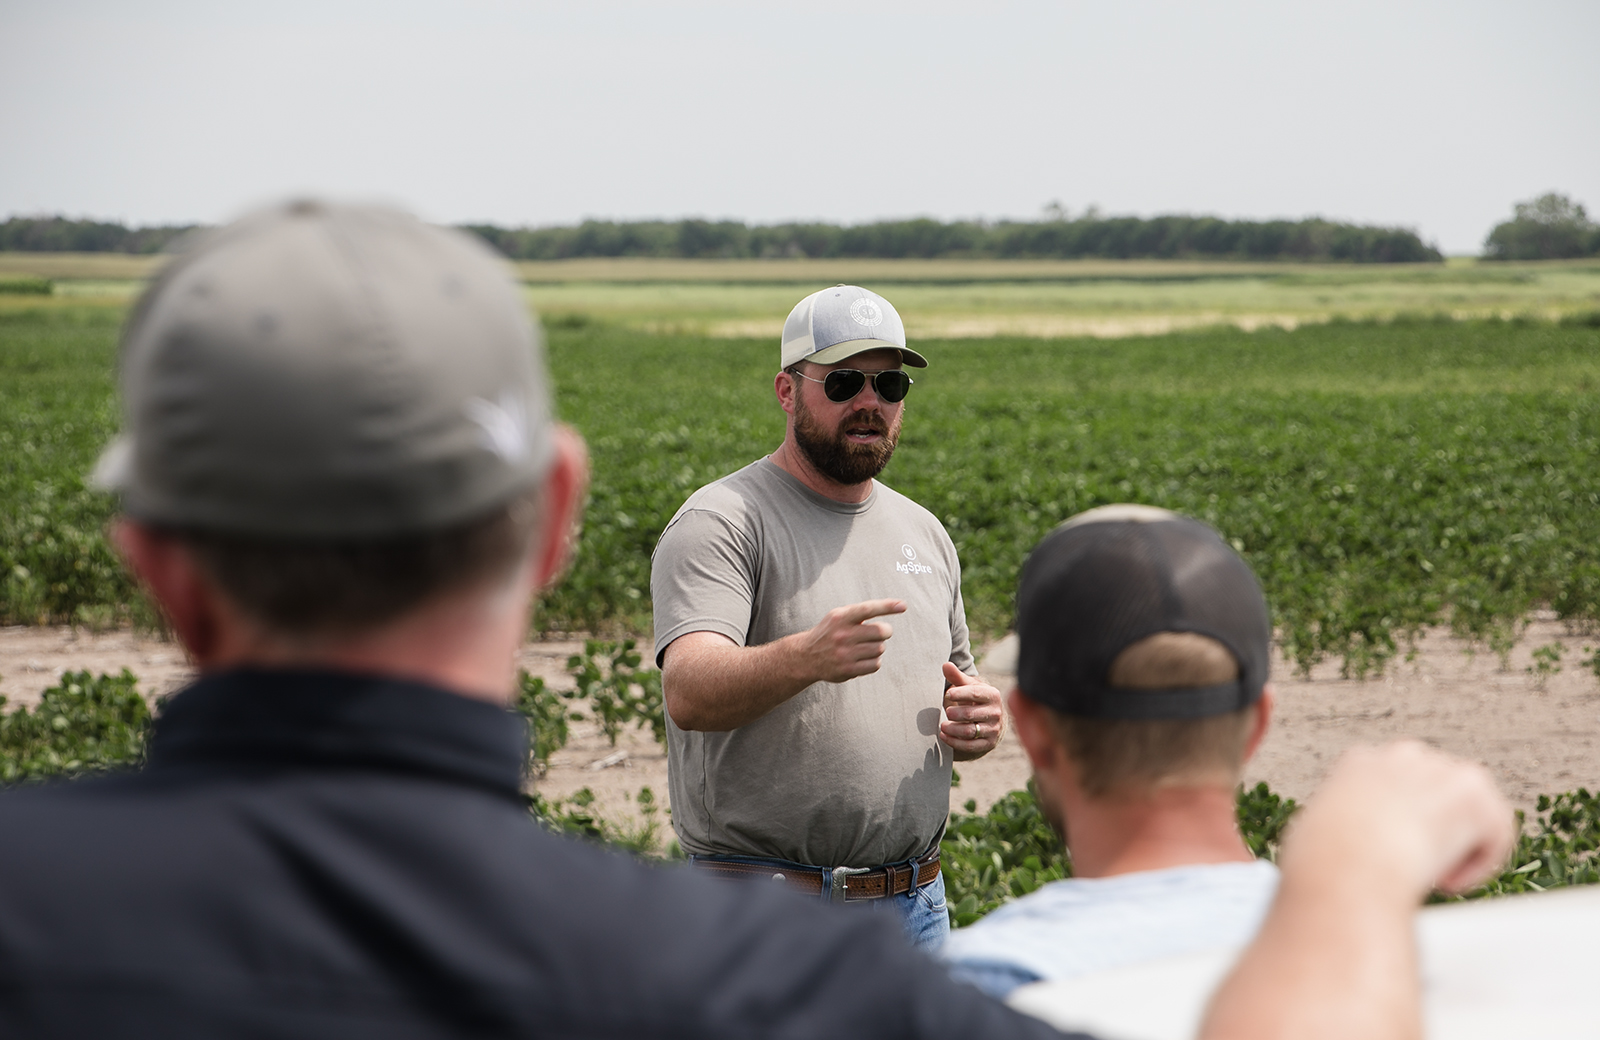 Jared Knock meets with farmers in South Dakota to talk about the benefits of sustainable practices and how programs can help producers invest in their land.